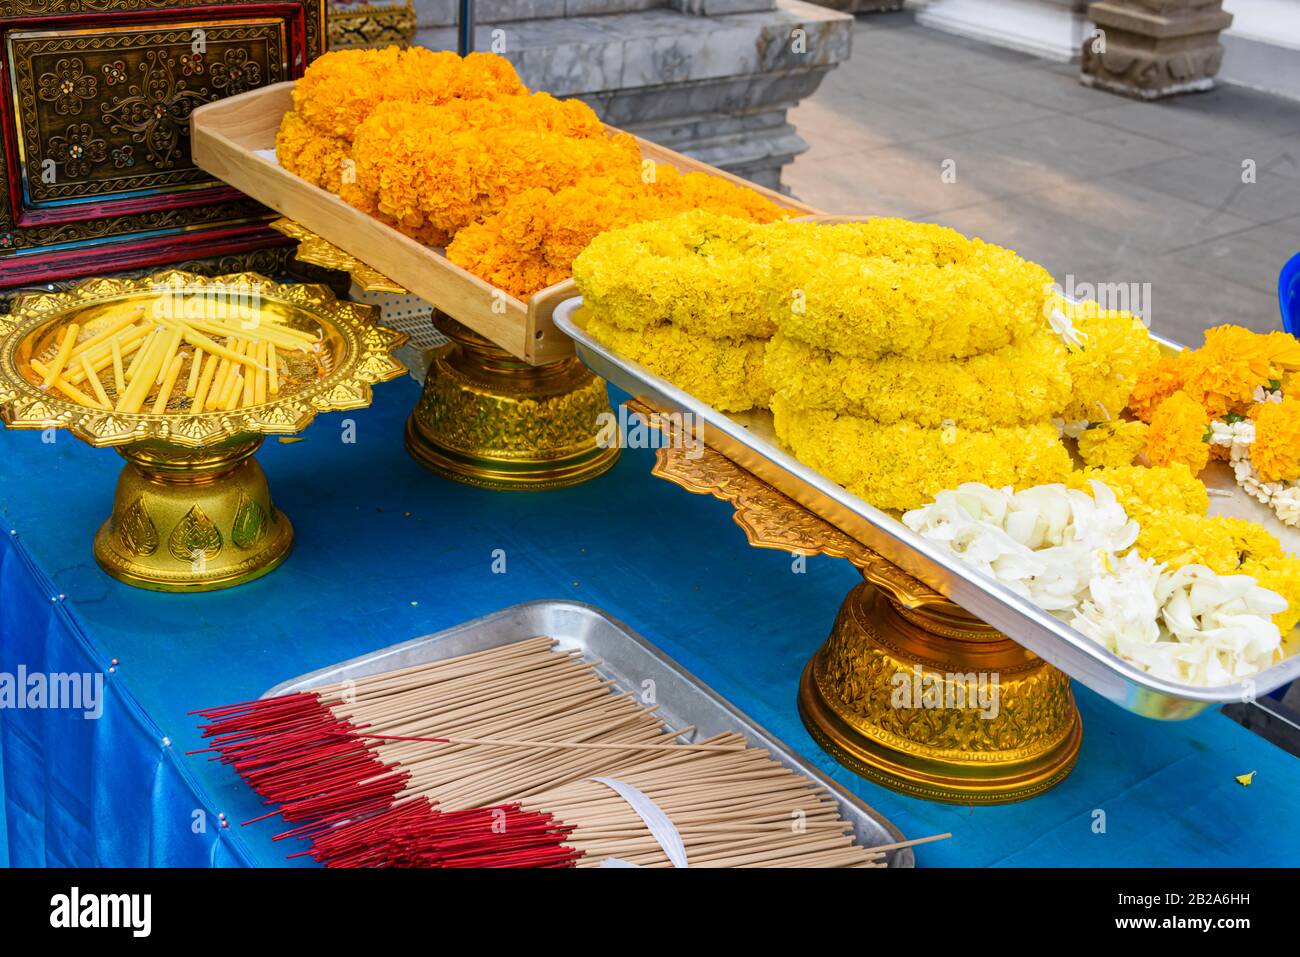 Garlands of orange and yellow chrysanthemum flowers with incense at a Buddhist temple, Bangkok, Thailand Stock Photo